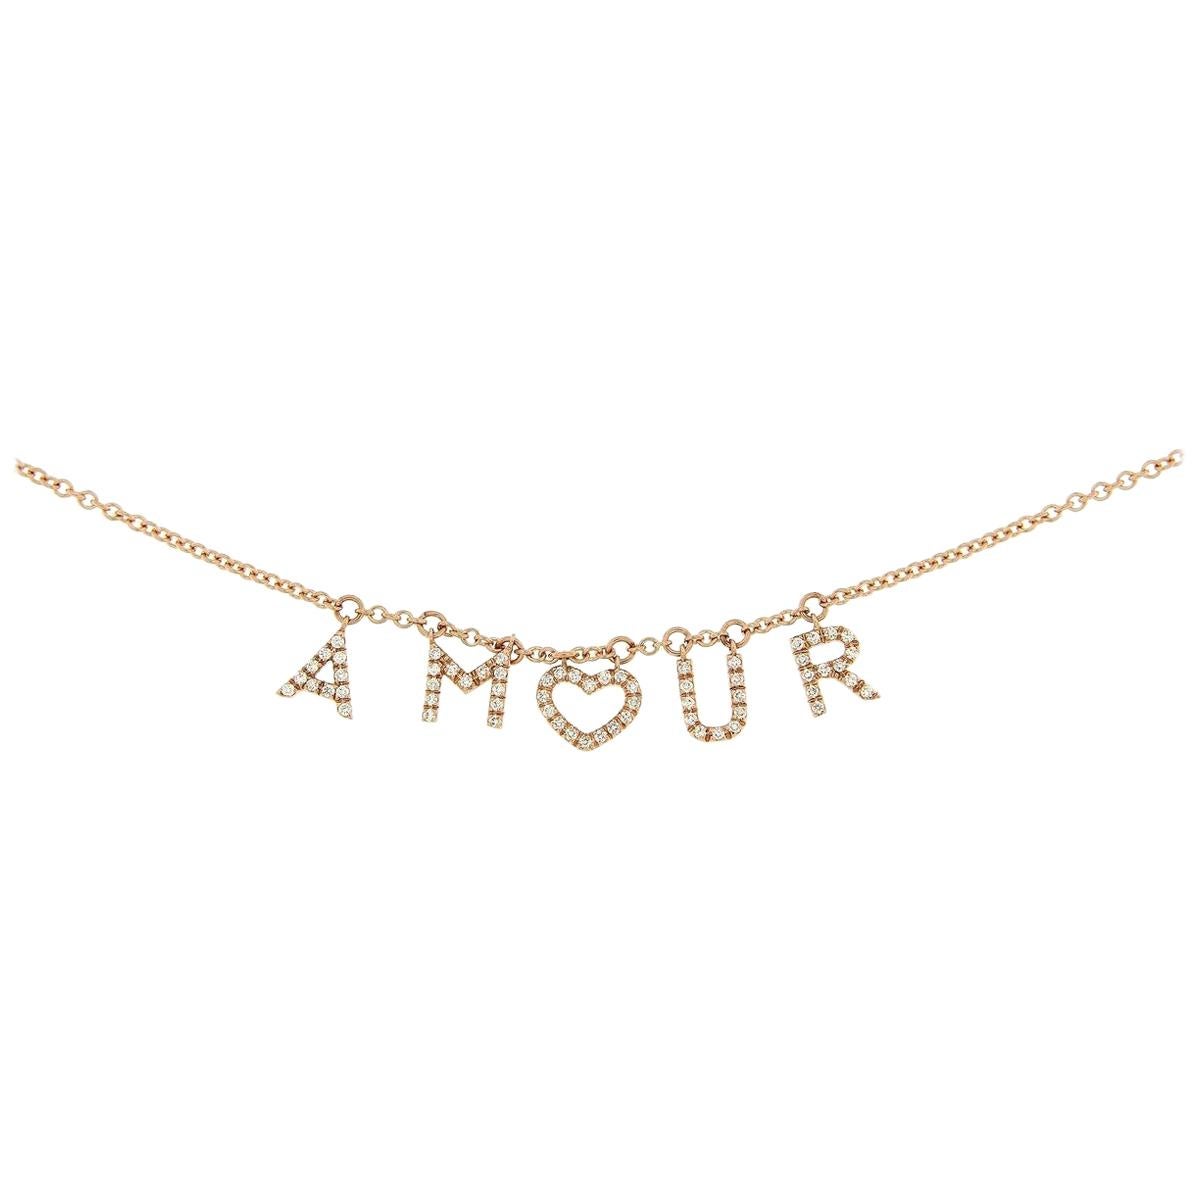 Customisable Diamond Necklace for Her 18 Karat Gold Made in Italy